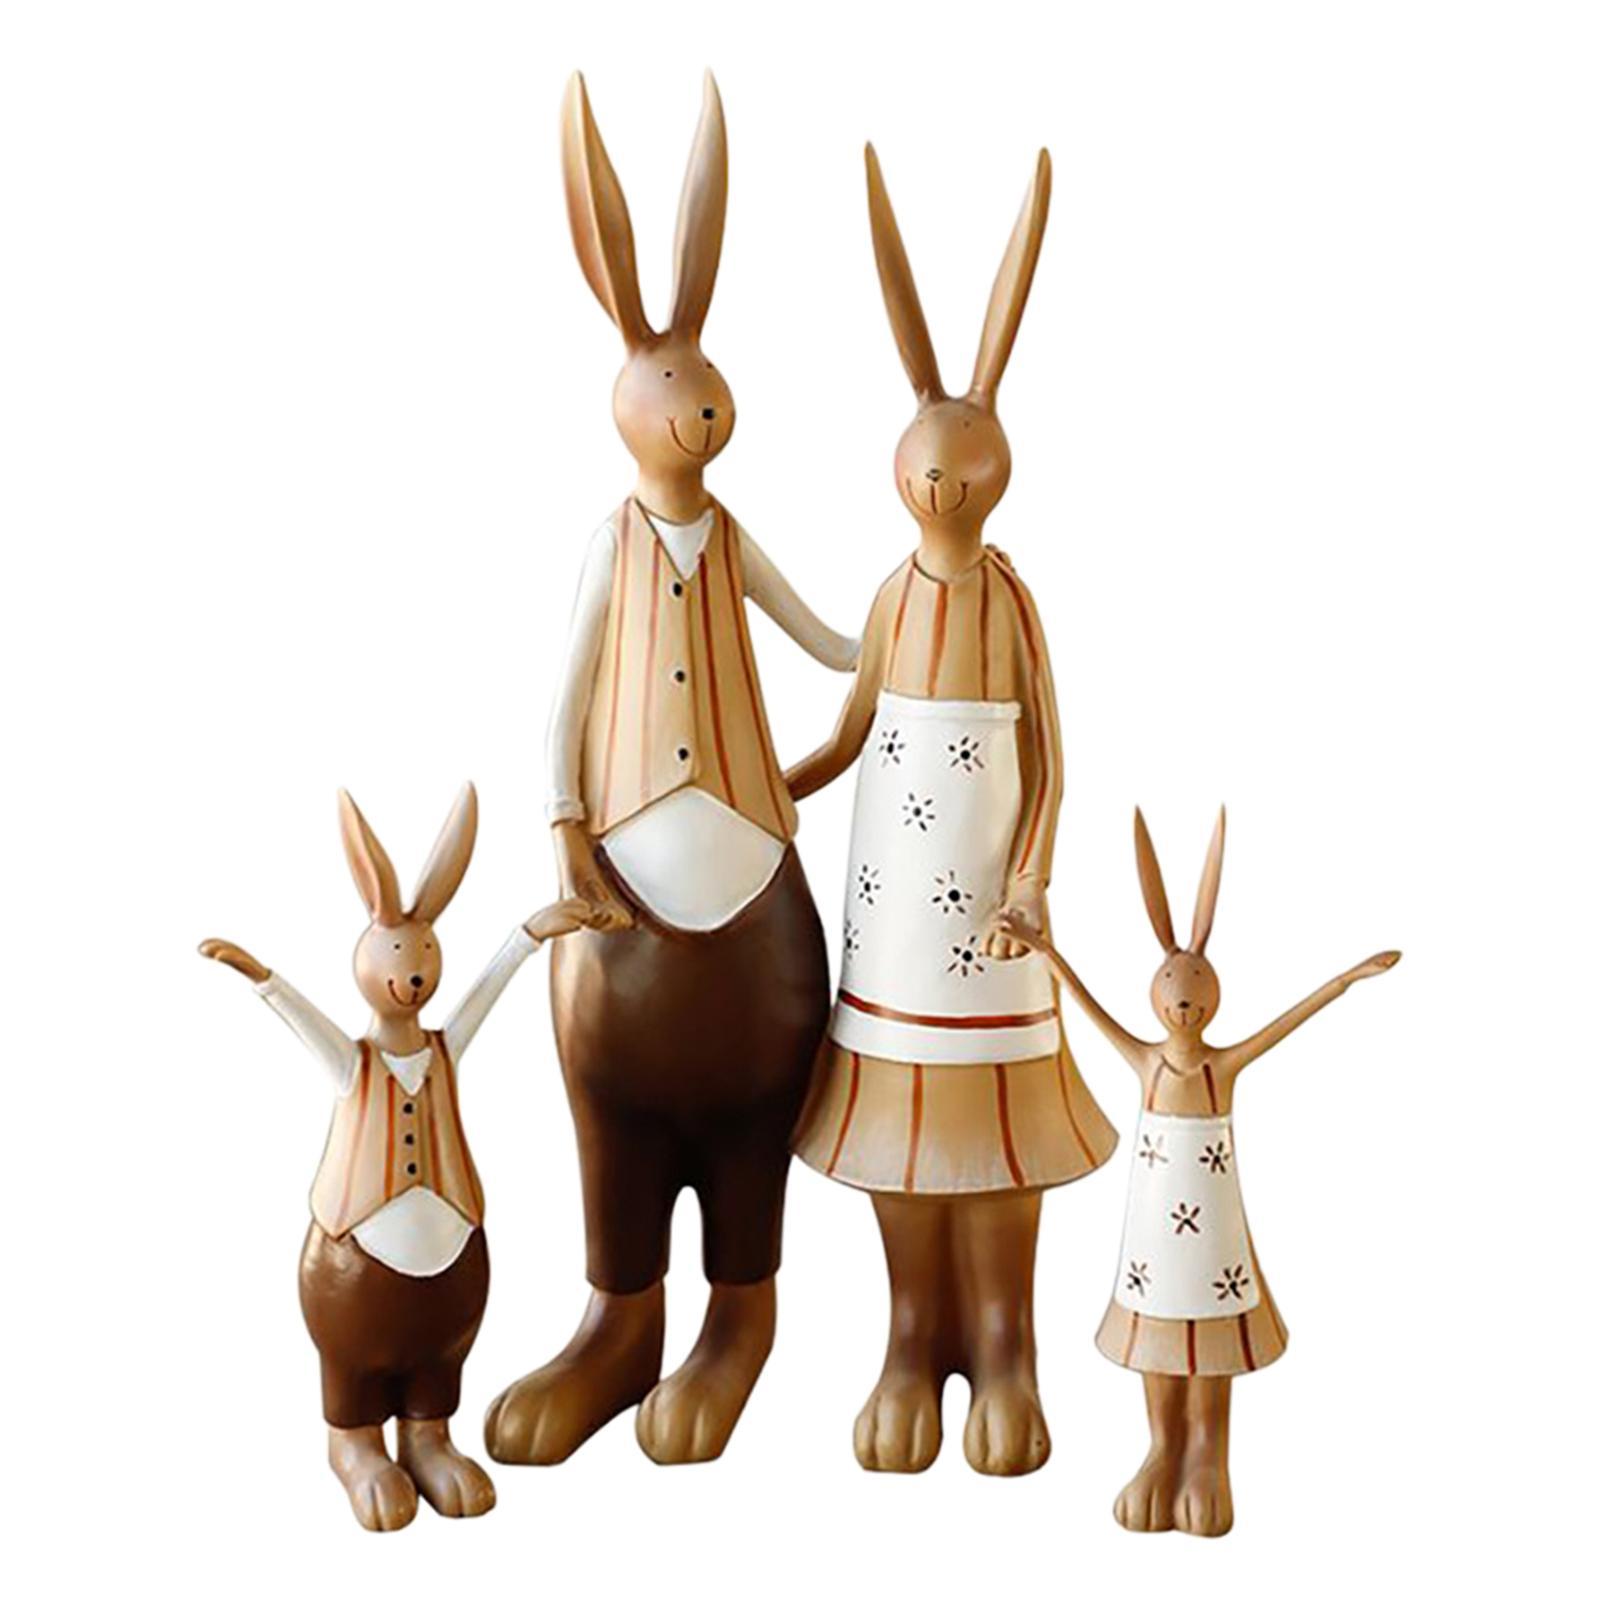 Home Decorative Rabbit Family Figurine Statue,Animal Statue Collectible Bedroom Figurine Statue for Home Cabinet Book Shelf Office